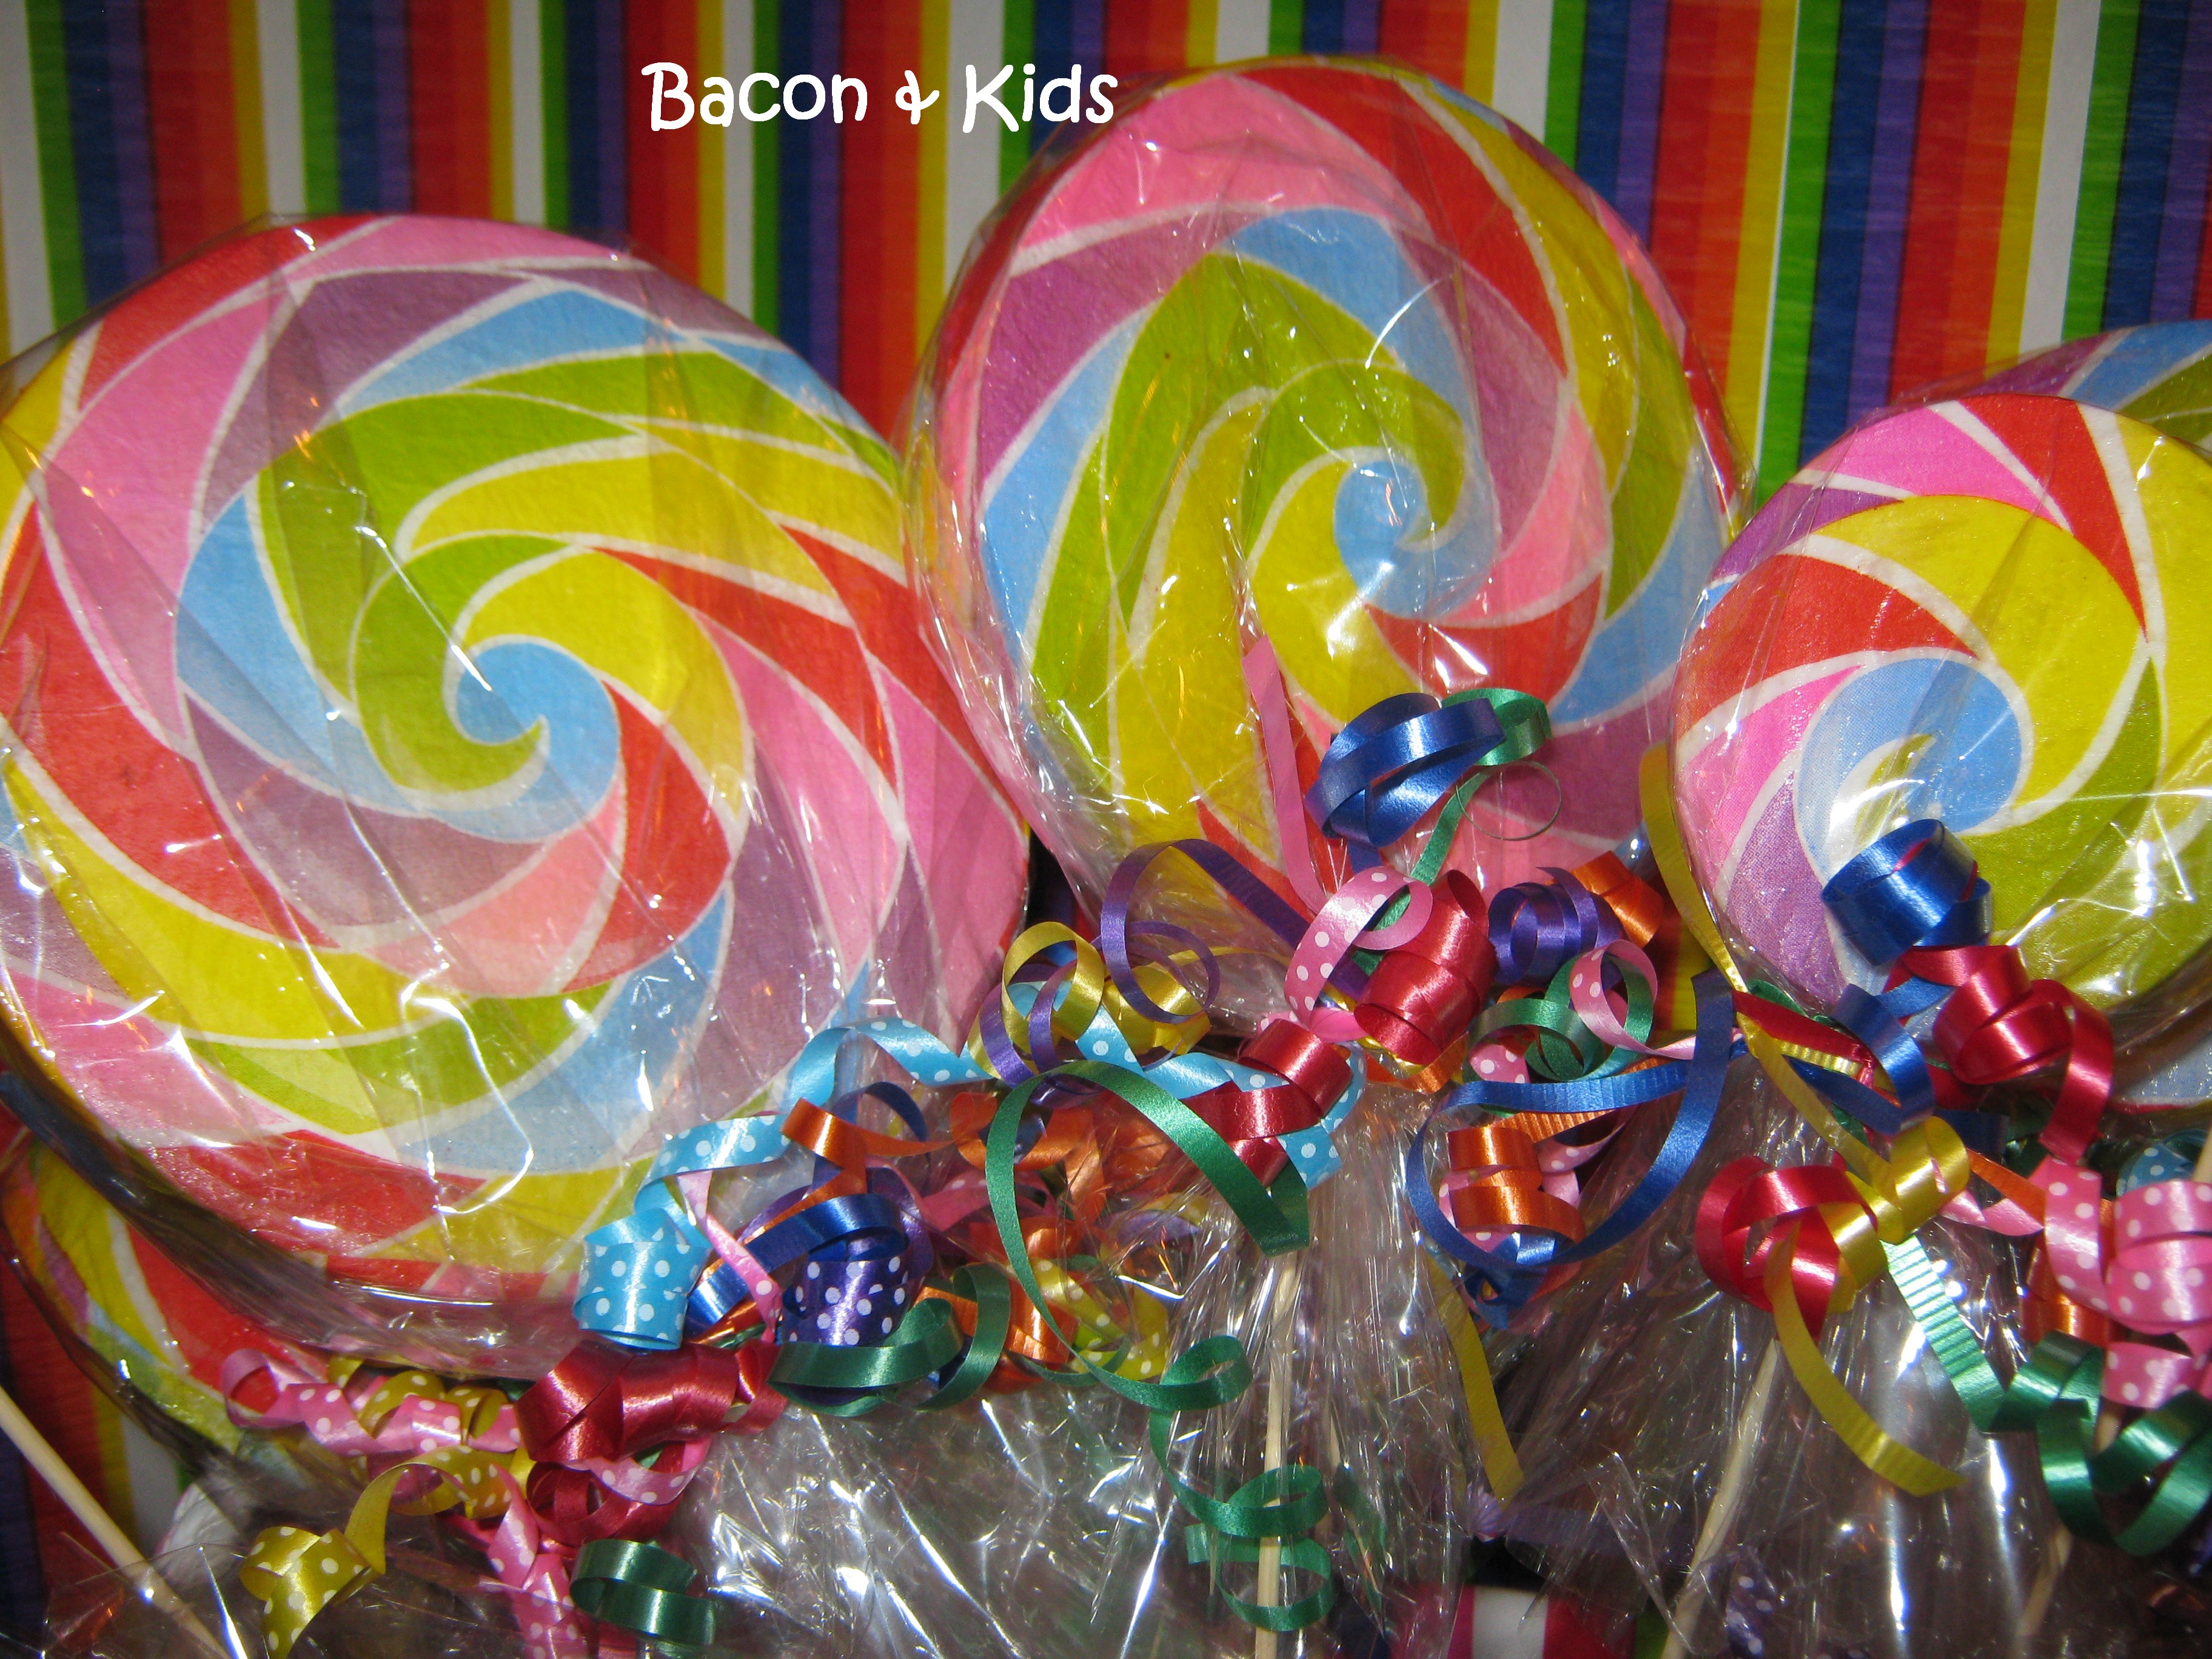  Candy  Party  Making the decorations   Bacon Kids